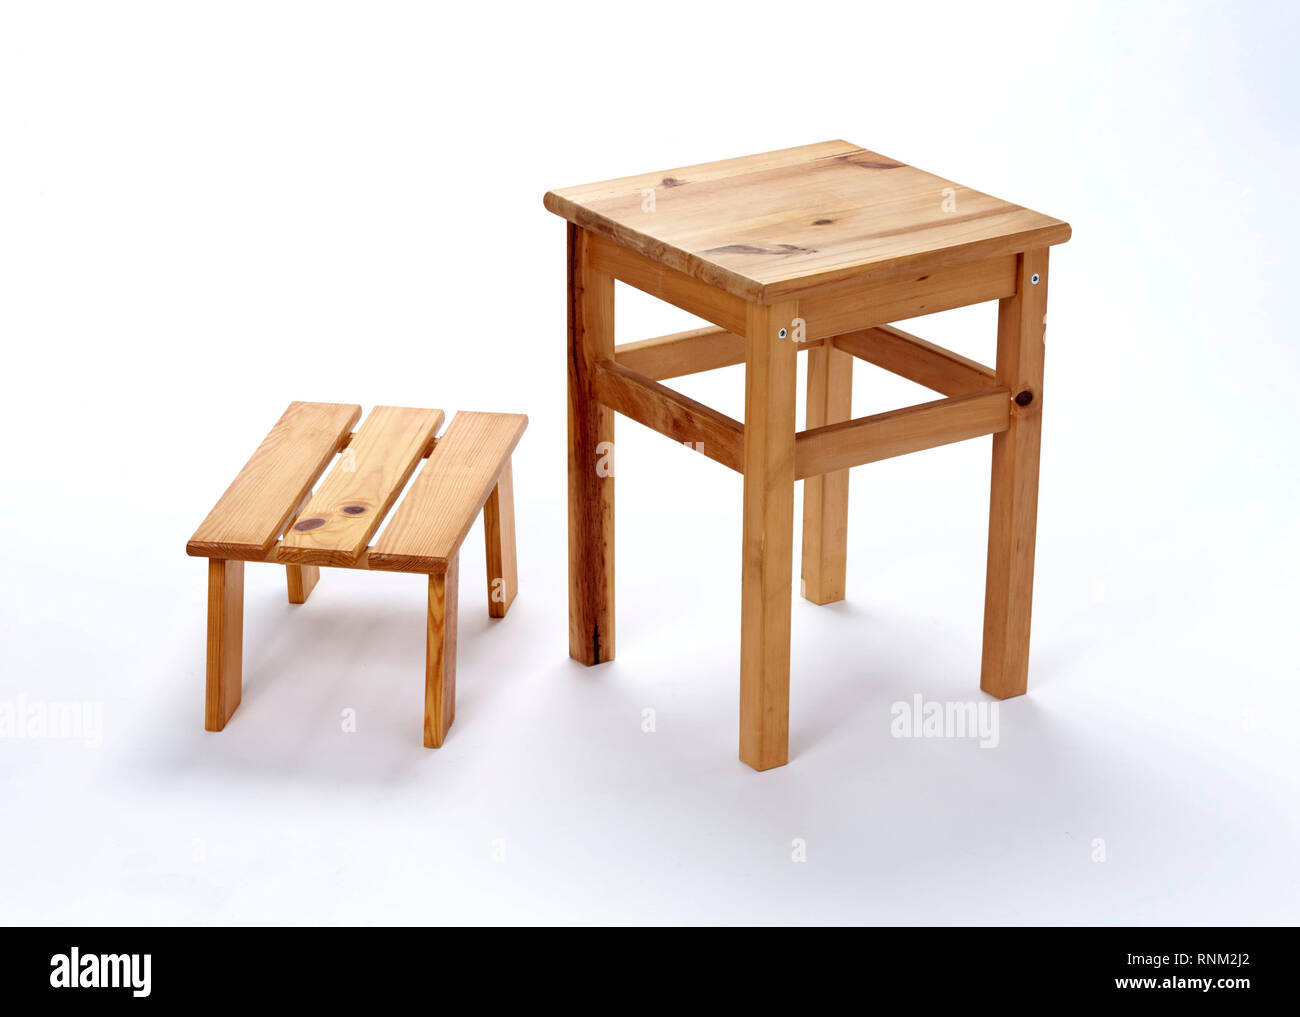 Footstool and stool made of wood. Germany. Stock Photo